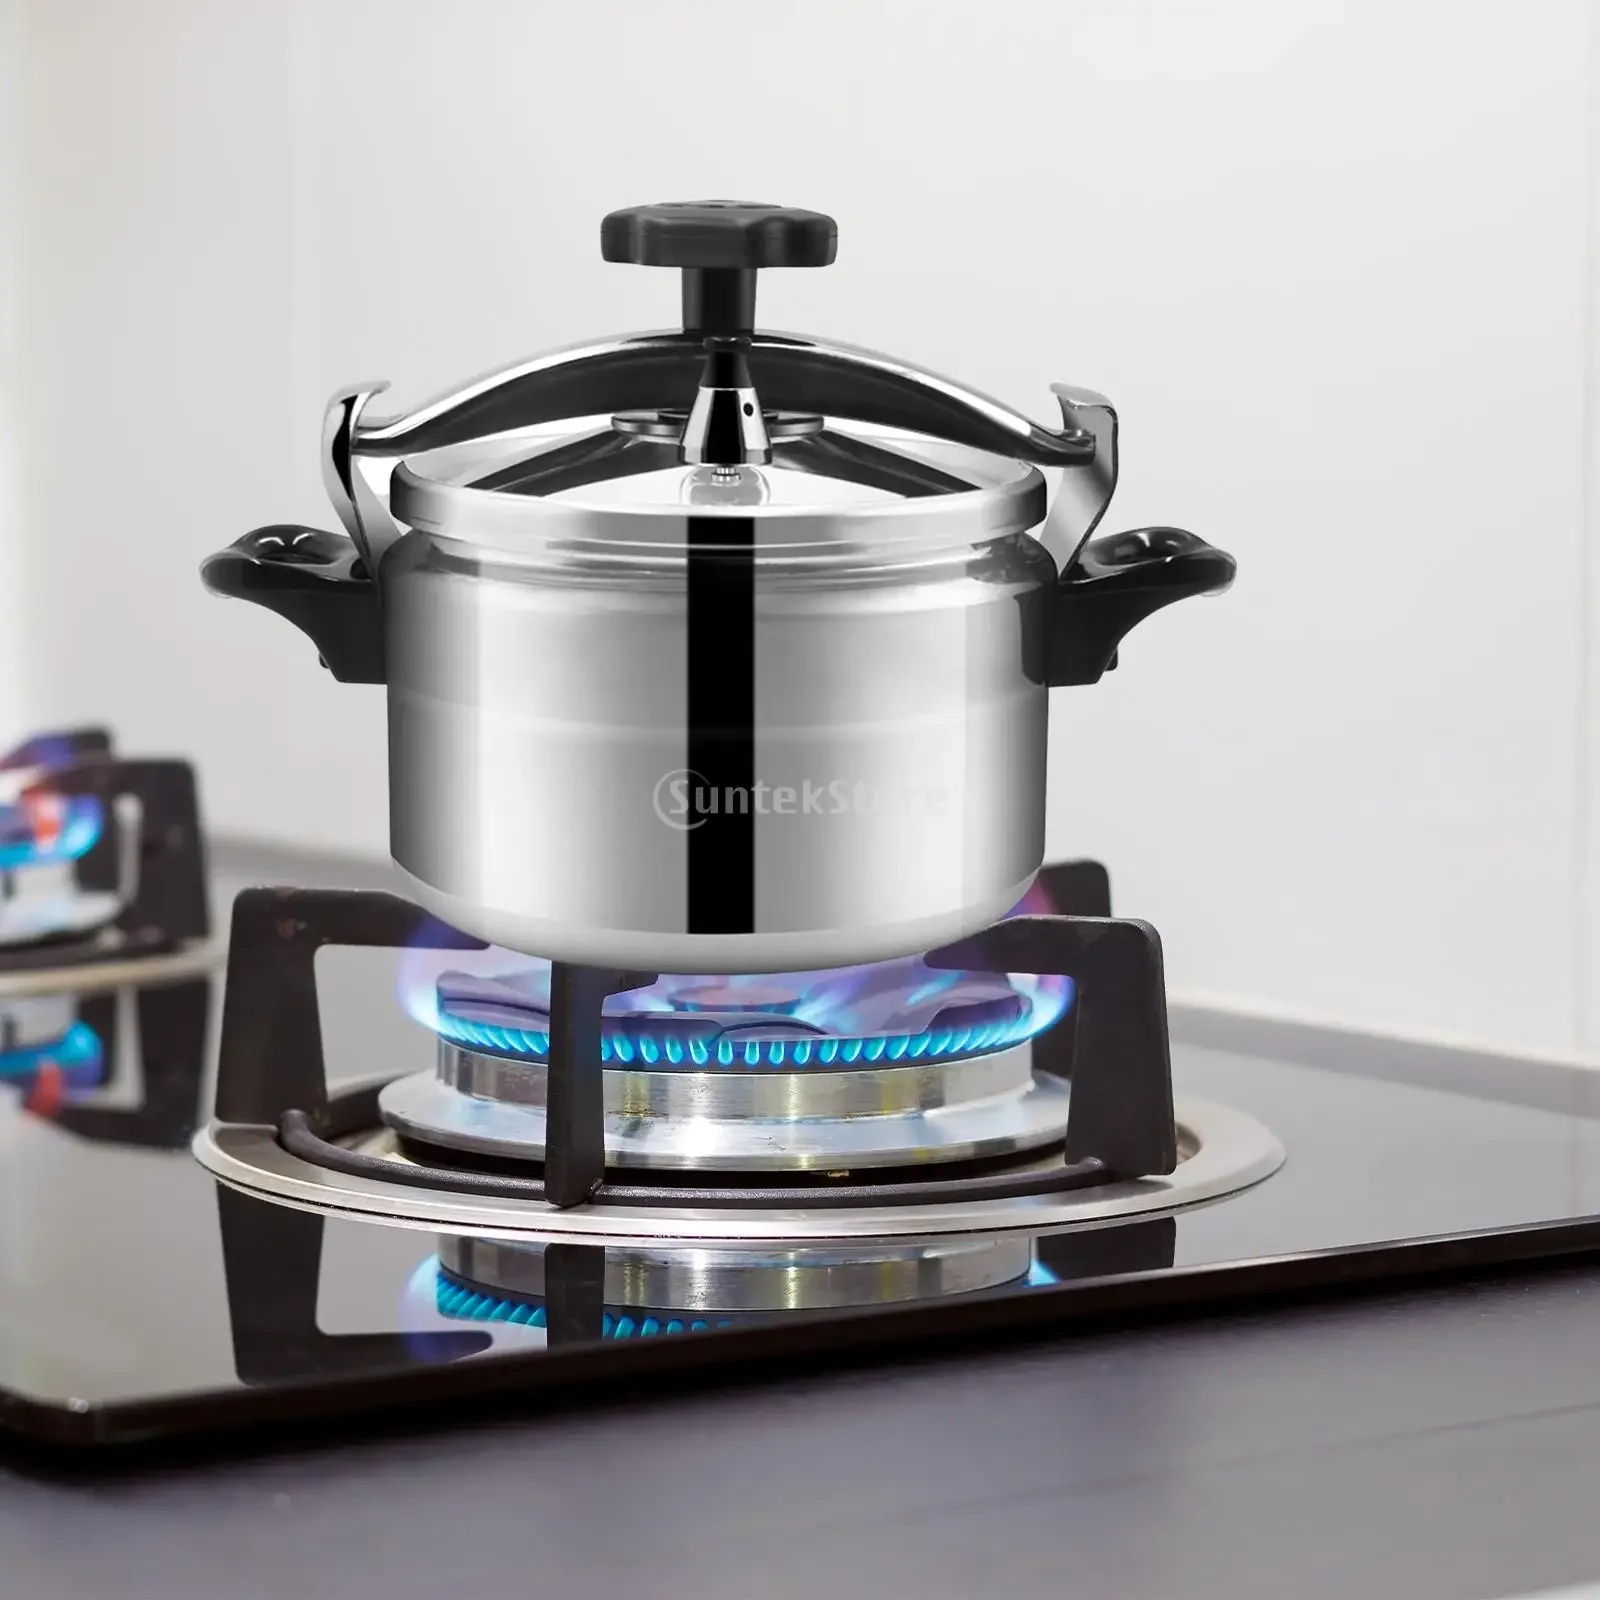 universal-gland-type-cooker-multipurpose-induction-cooker-deep-pressure-pan-for-restaurant-kitchen-household-commercial